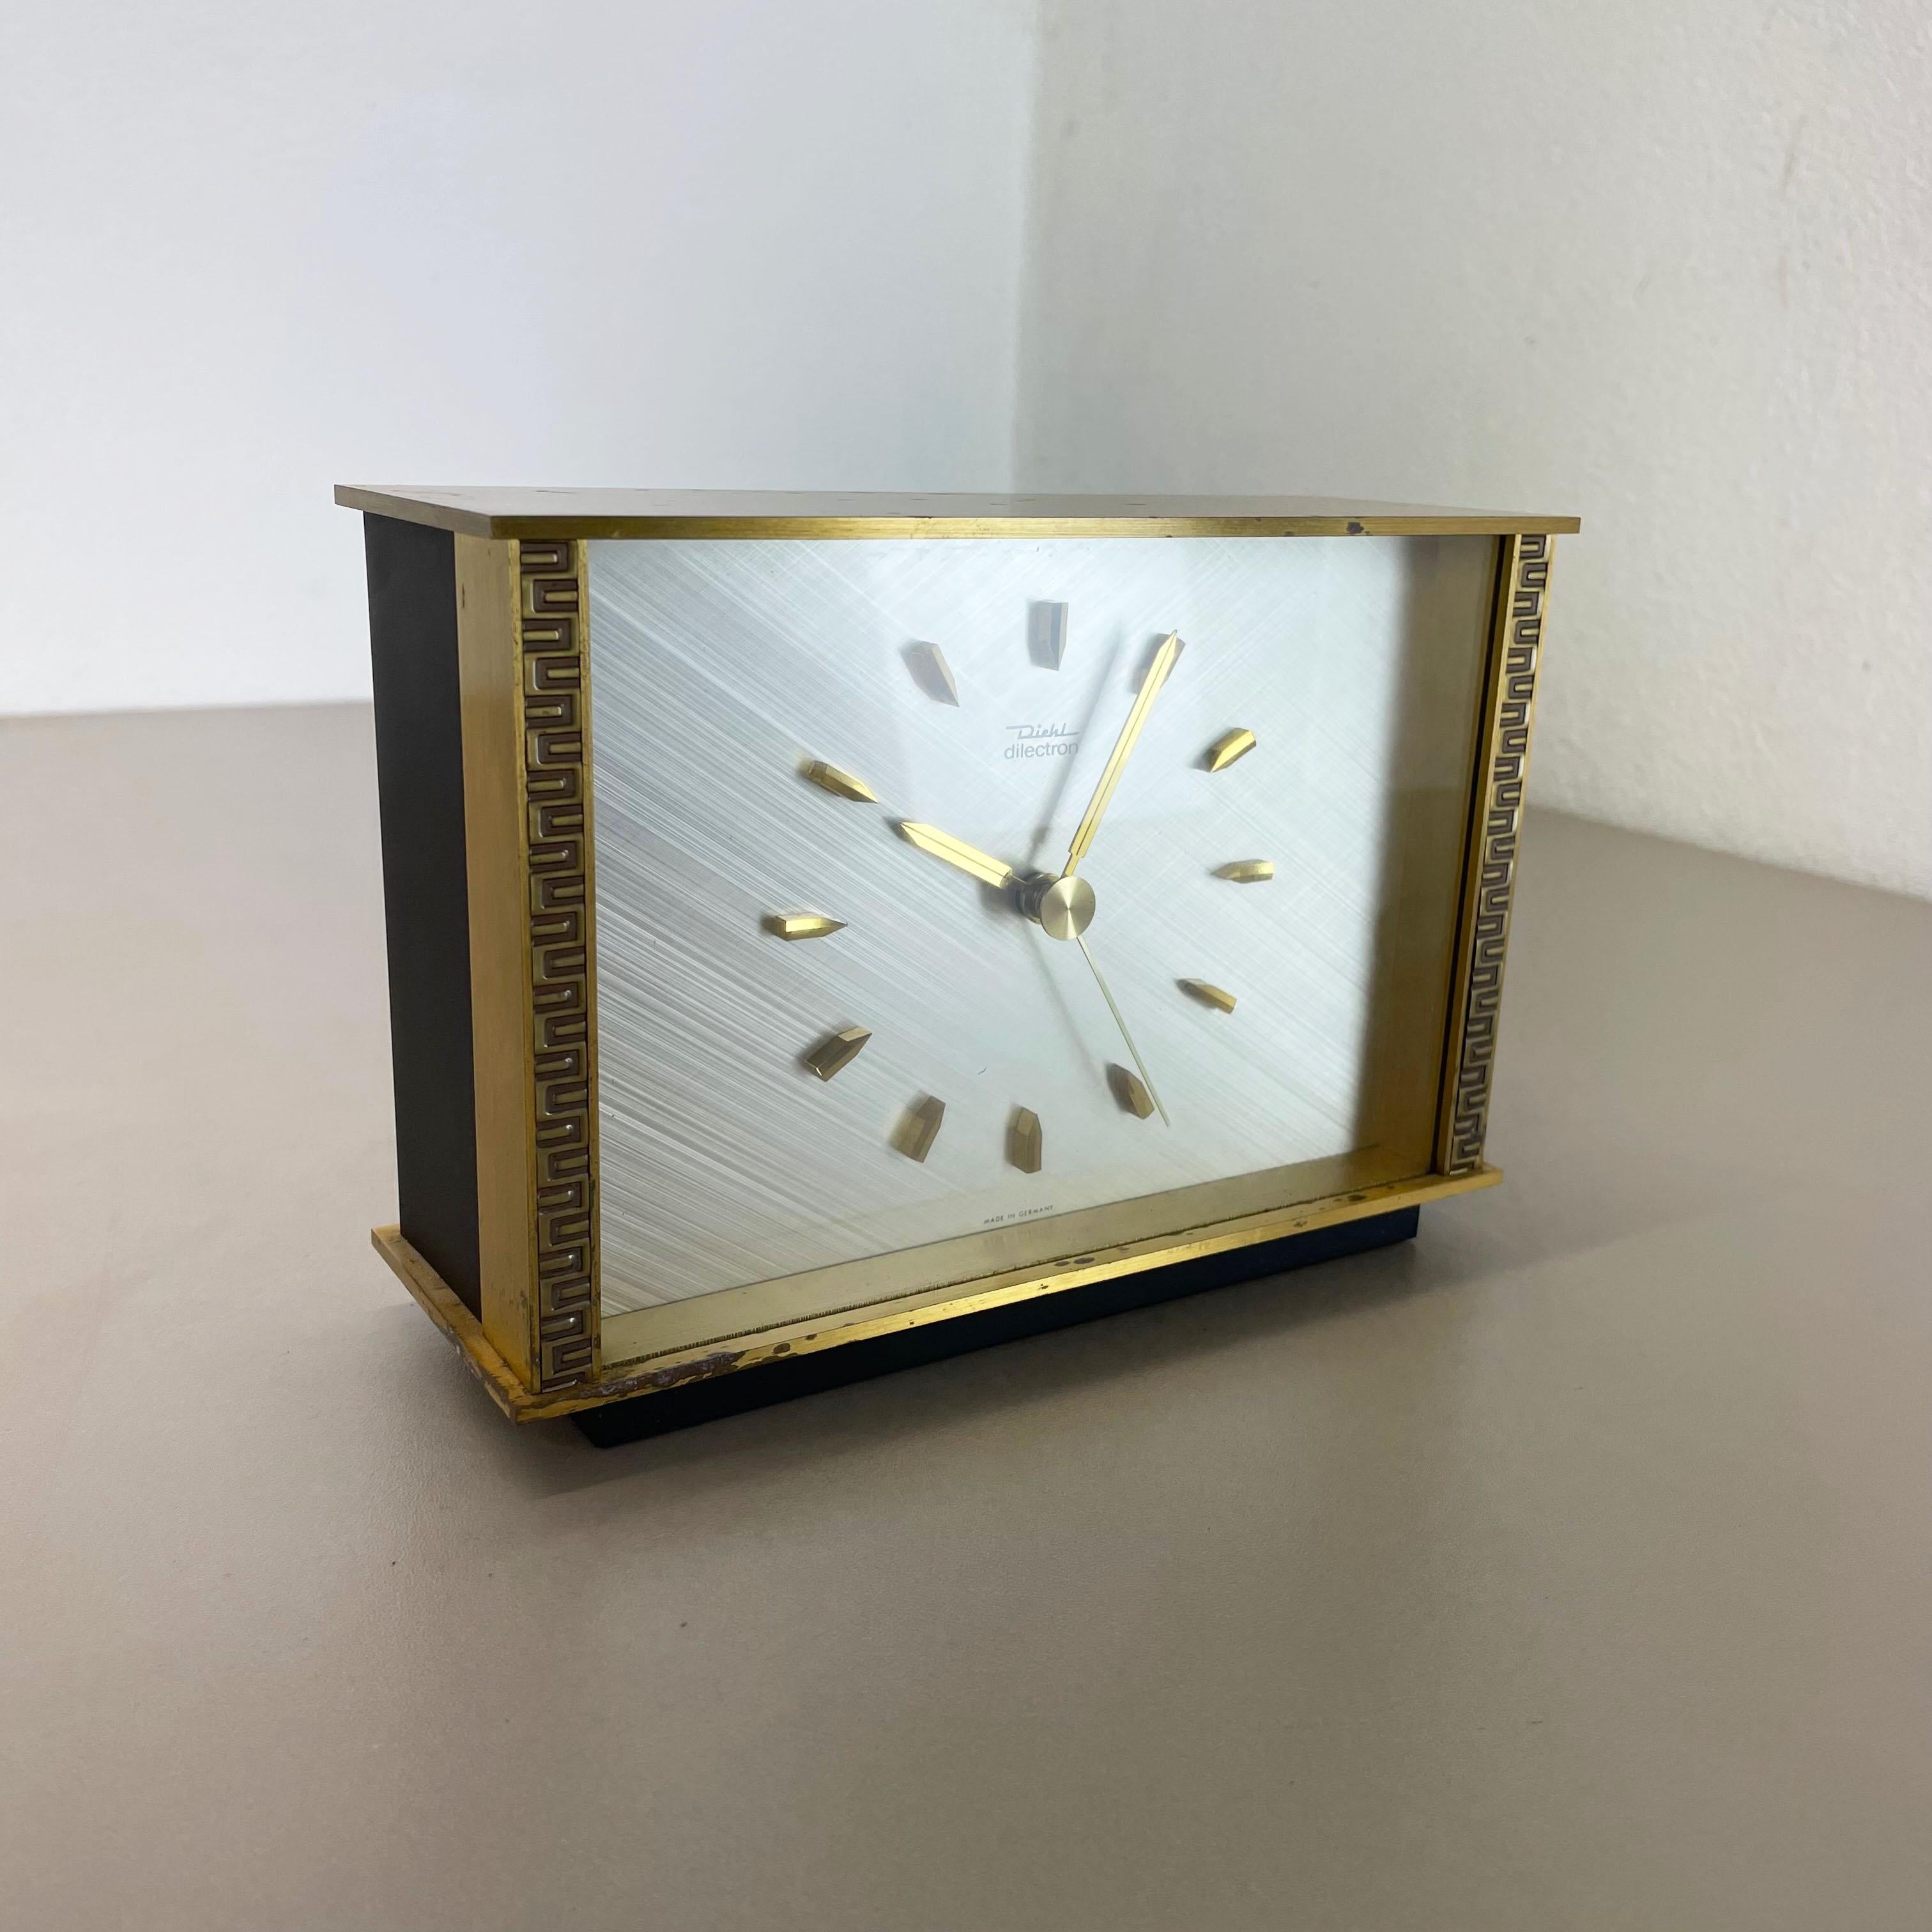 20th Century Vintage Modernist Metal Brass Table Clock by Diehl Dilectron, Germany 1960s For Sale